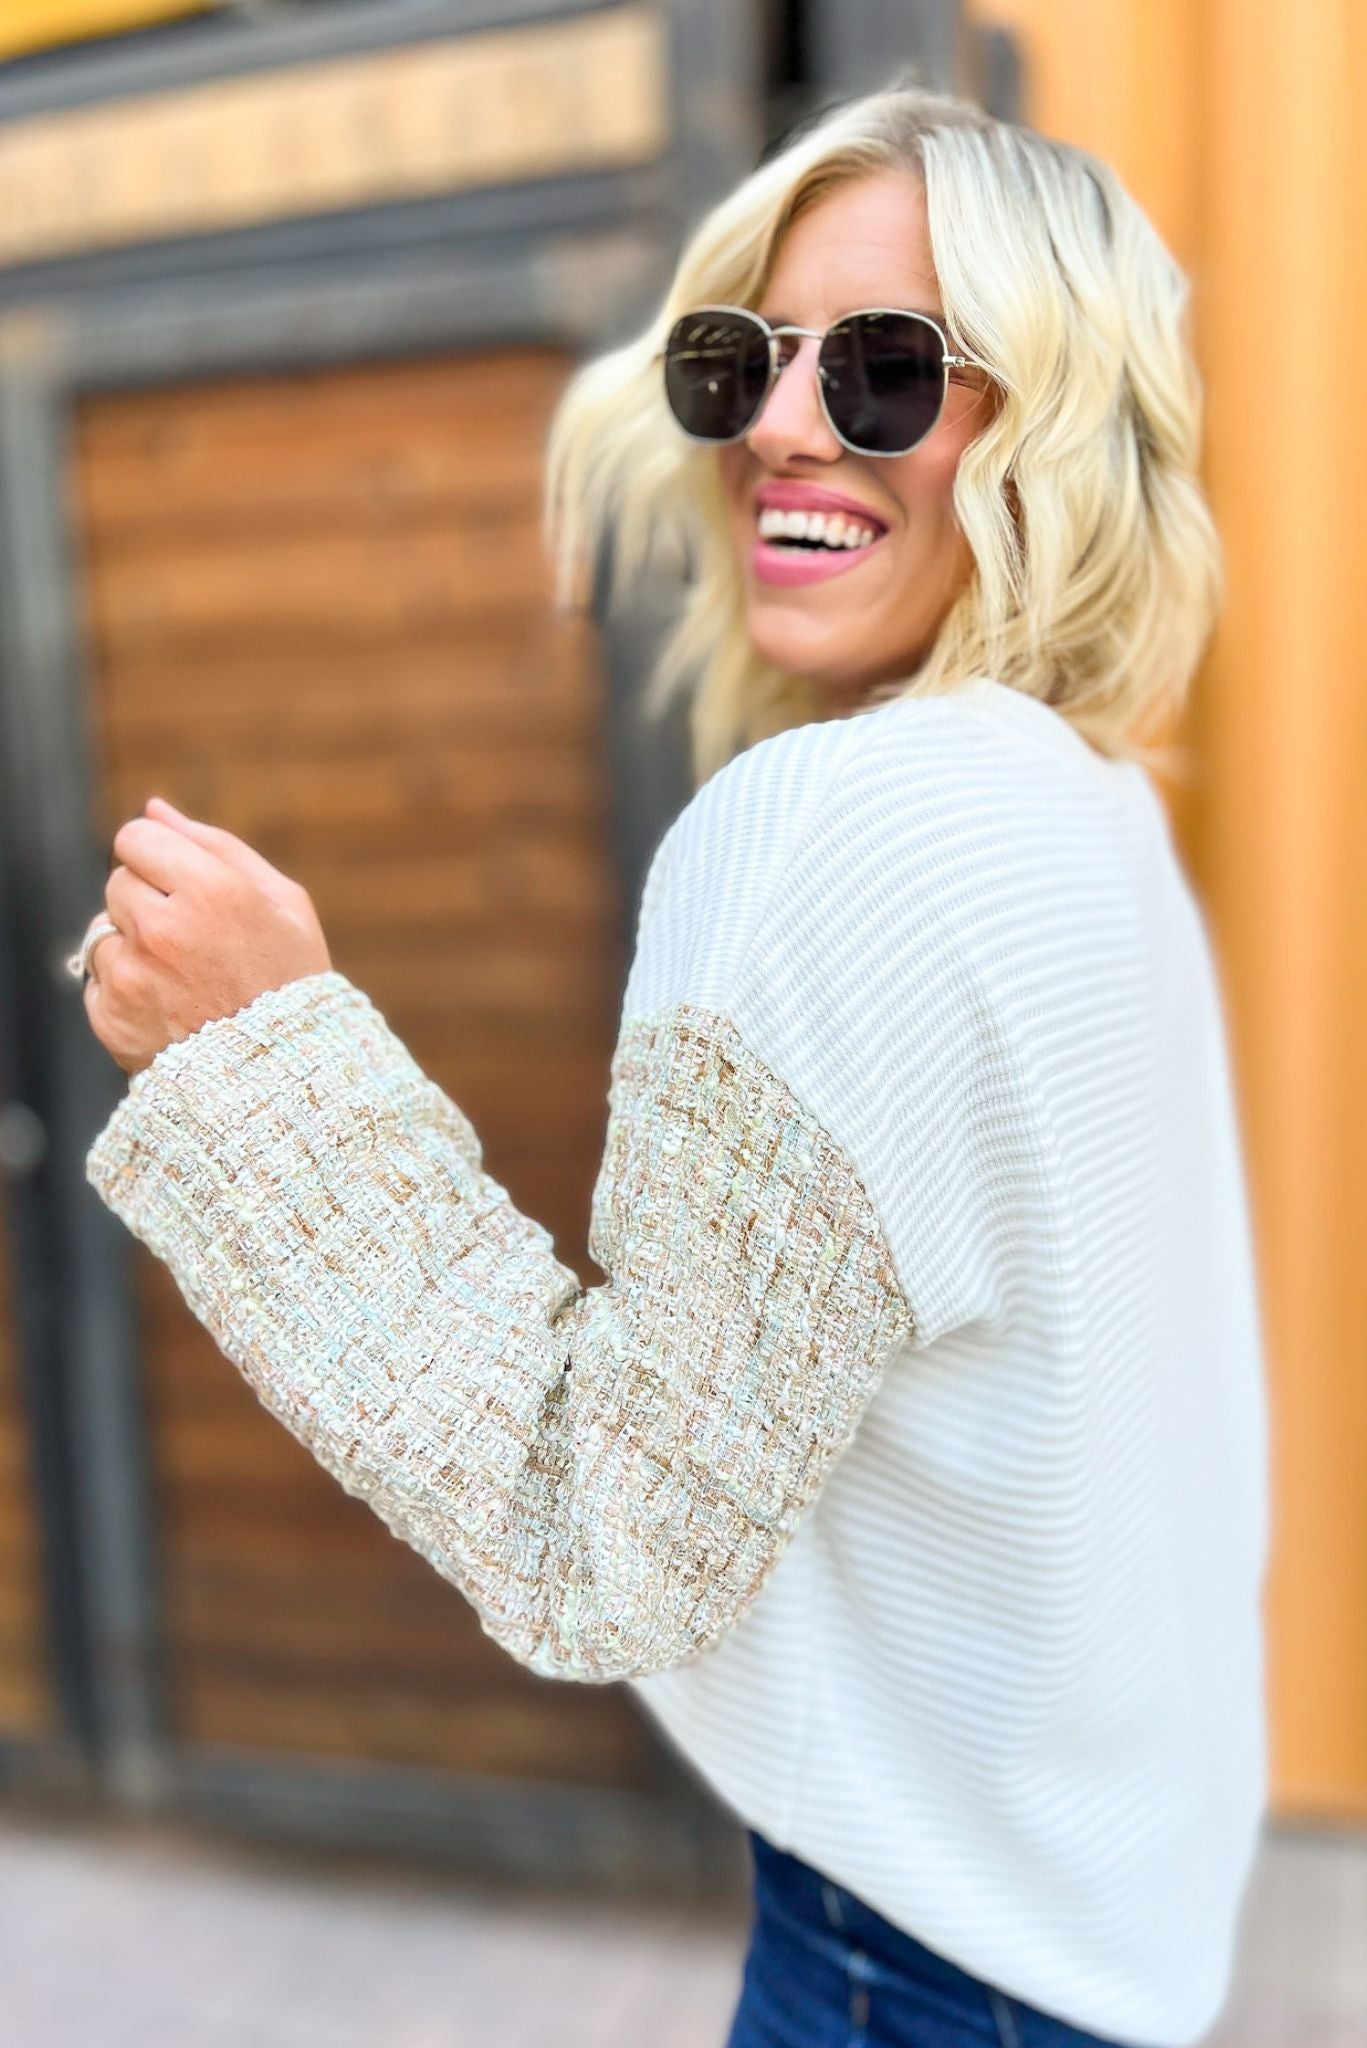 Load image into Gallery viewer, Off white Knit Tweed Sleeve Sweater, tweed detail, must have, girly look, mom style, shop style your senses by mallory fitzsimmons
